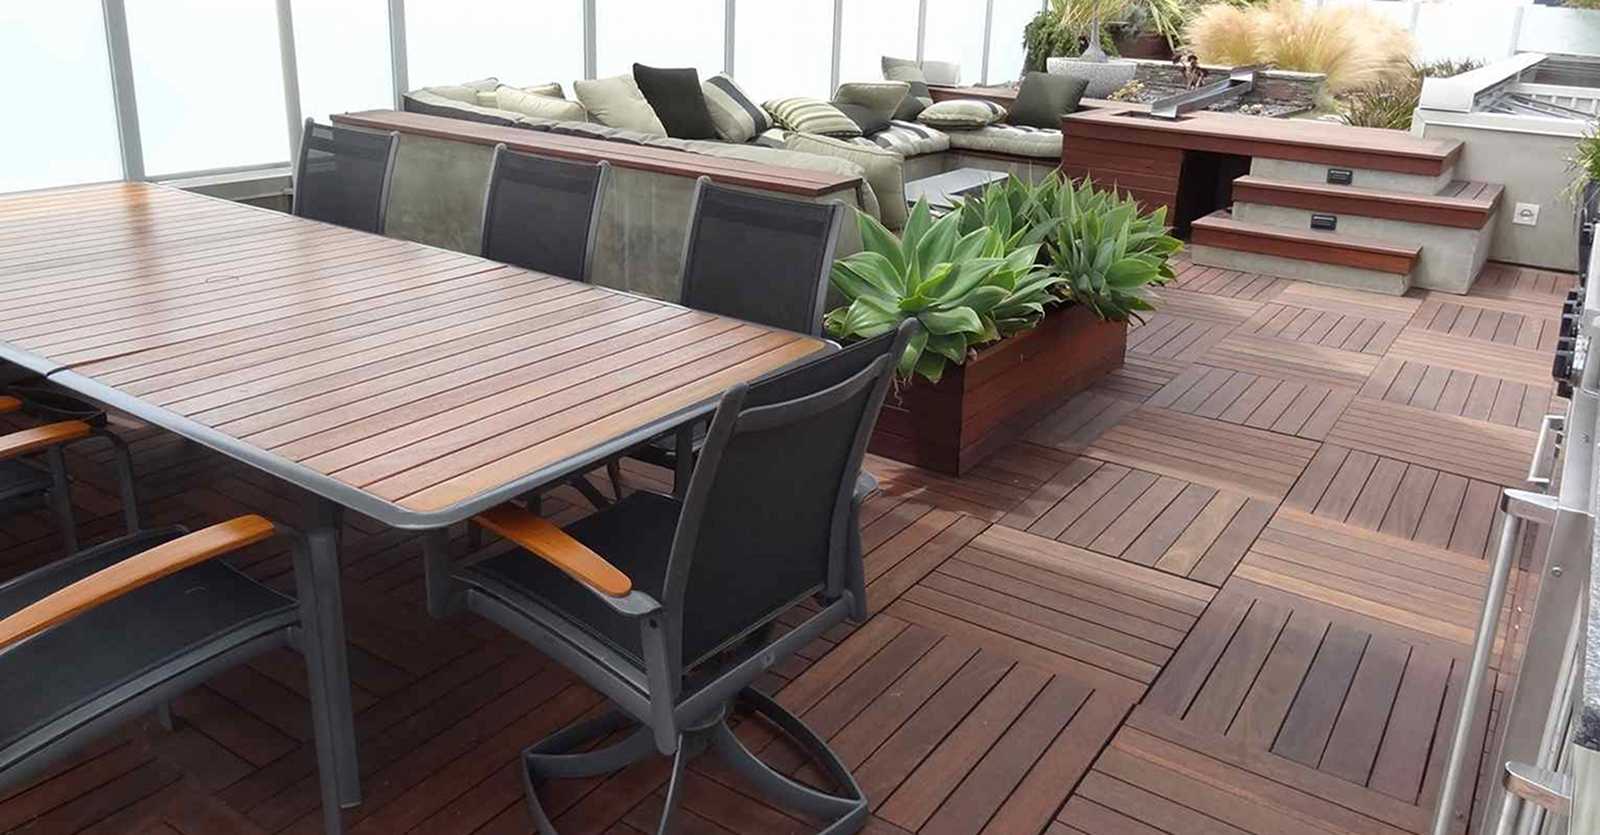 Roof top patio area with deck surfaces of Ipe wood and teak furniture, wood planter boxes and railings